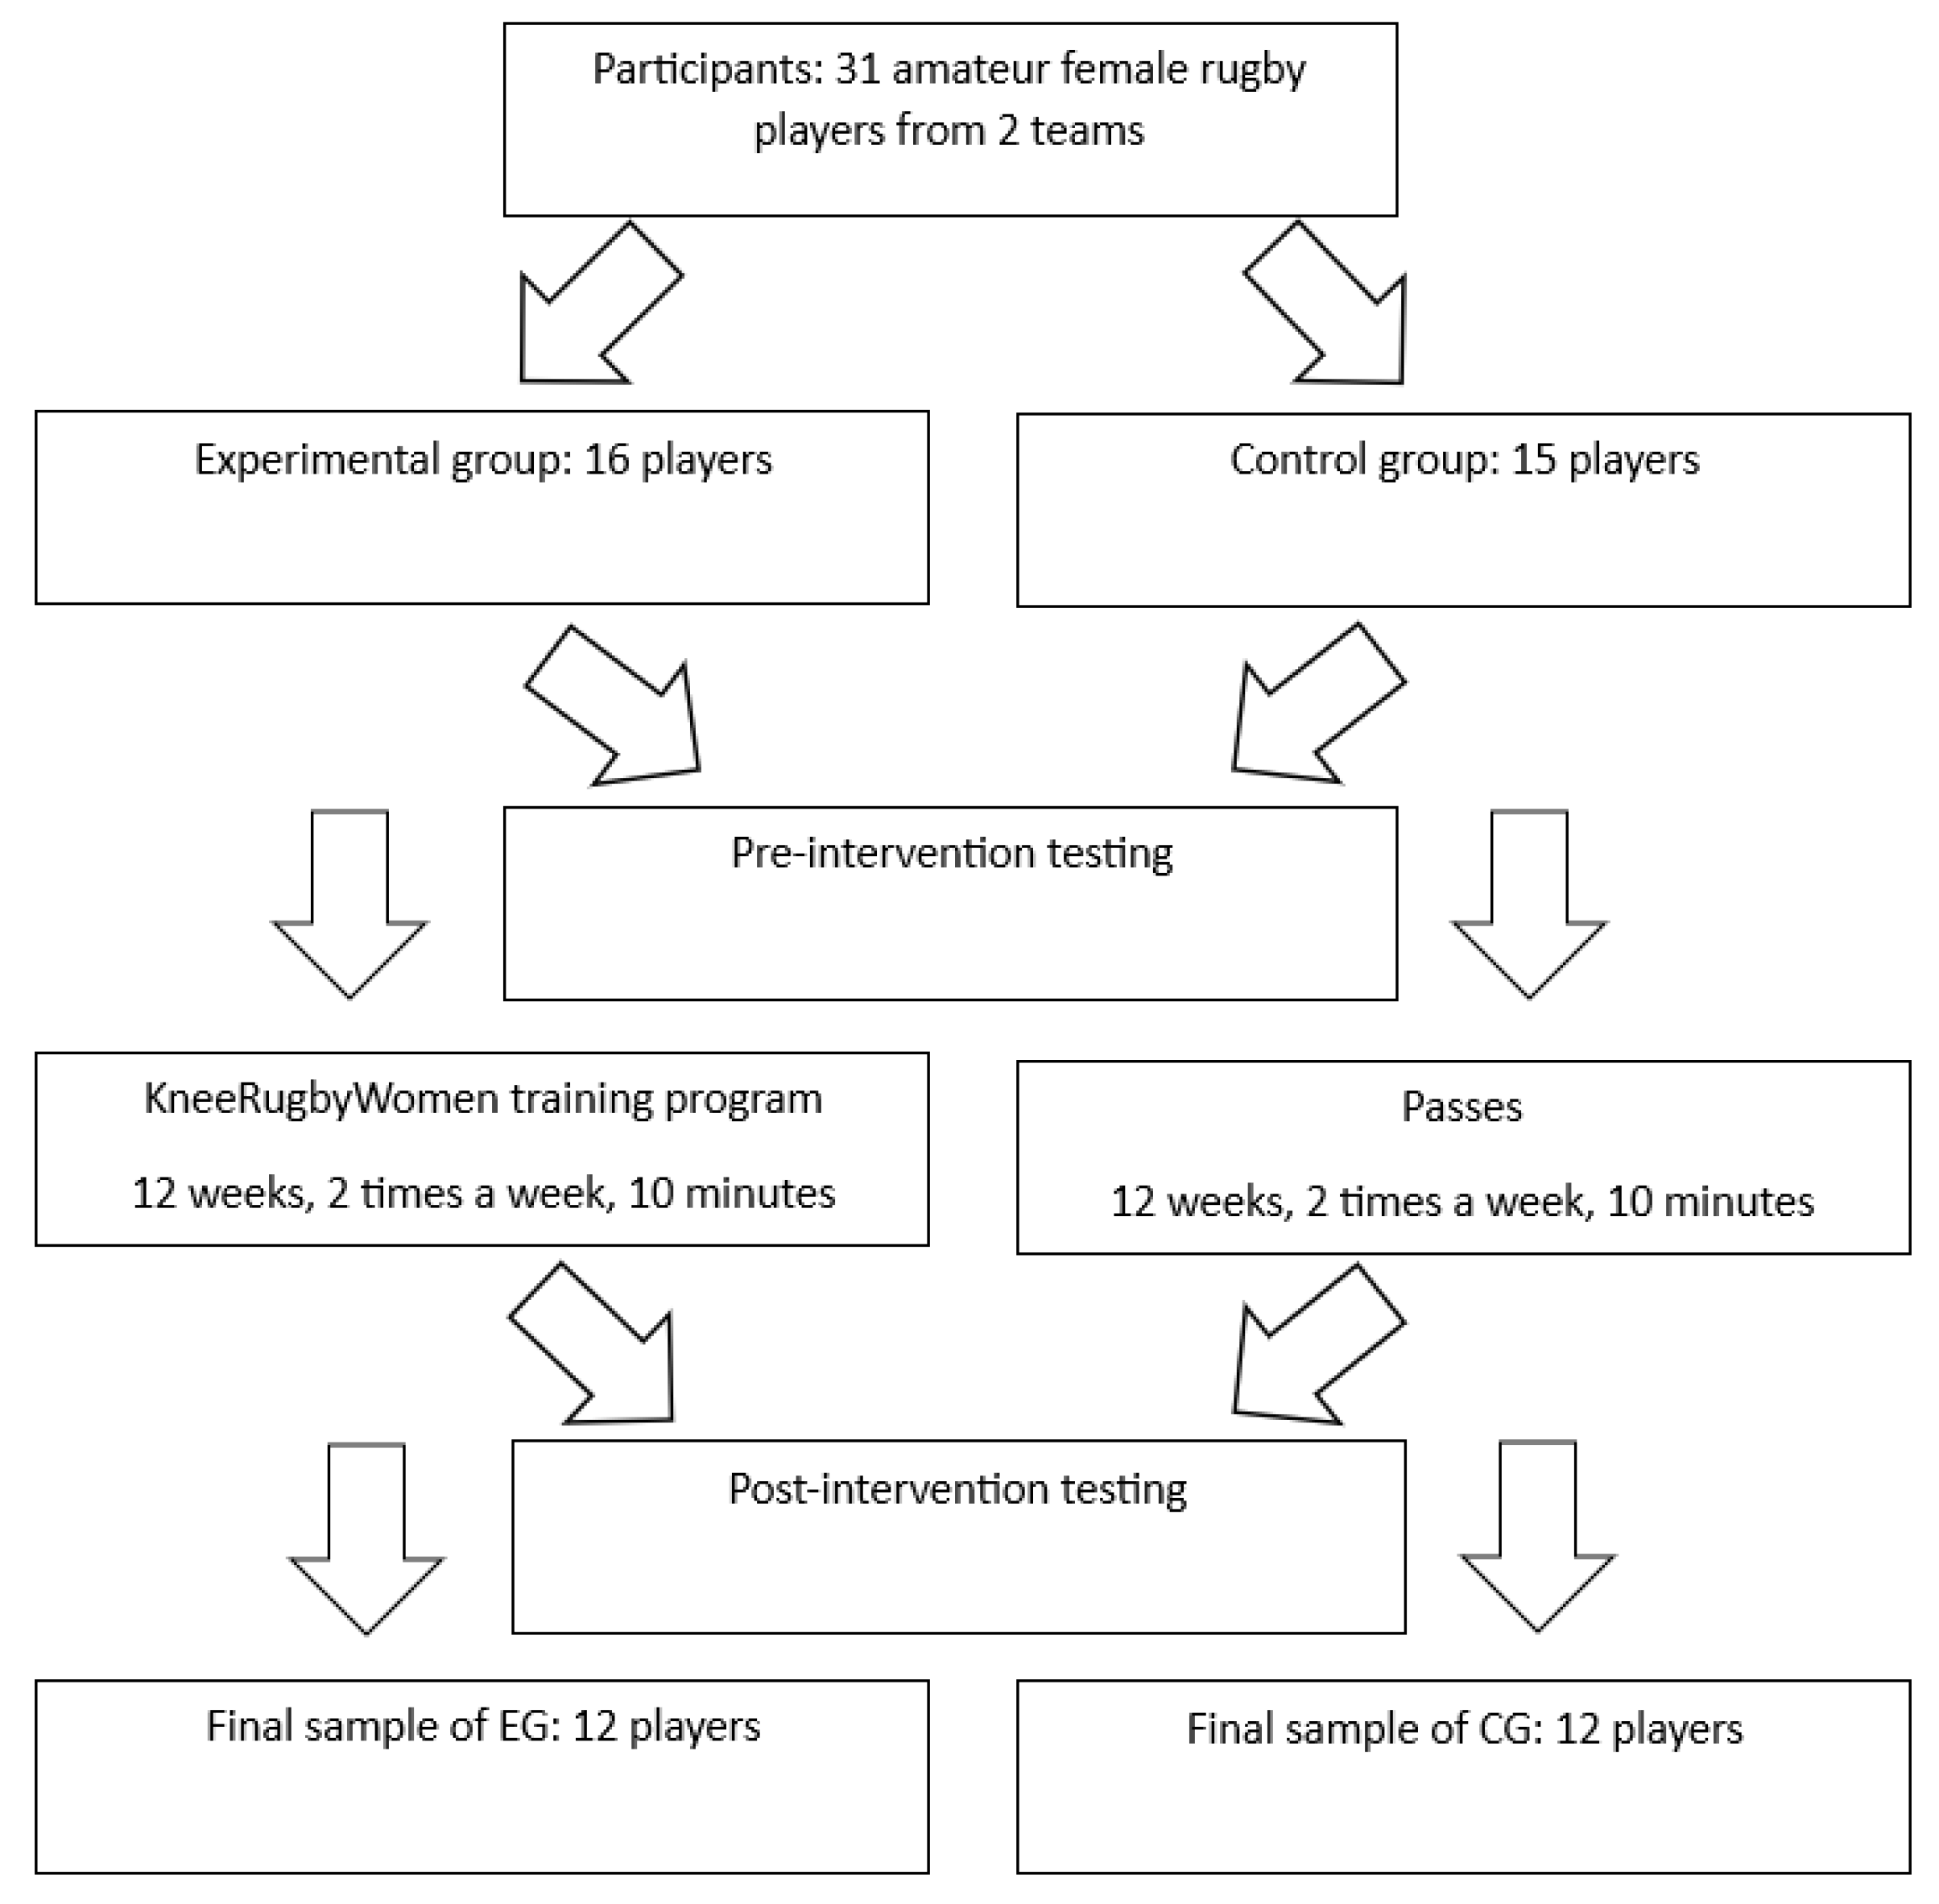 Applied Sciences Free Full-Text The Impact of a Novel Neuromuscular Training Program on Leg Stiffness, Reactive Strength, and Landing Biomechanics in Amateur Female Rugby Players pic